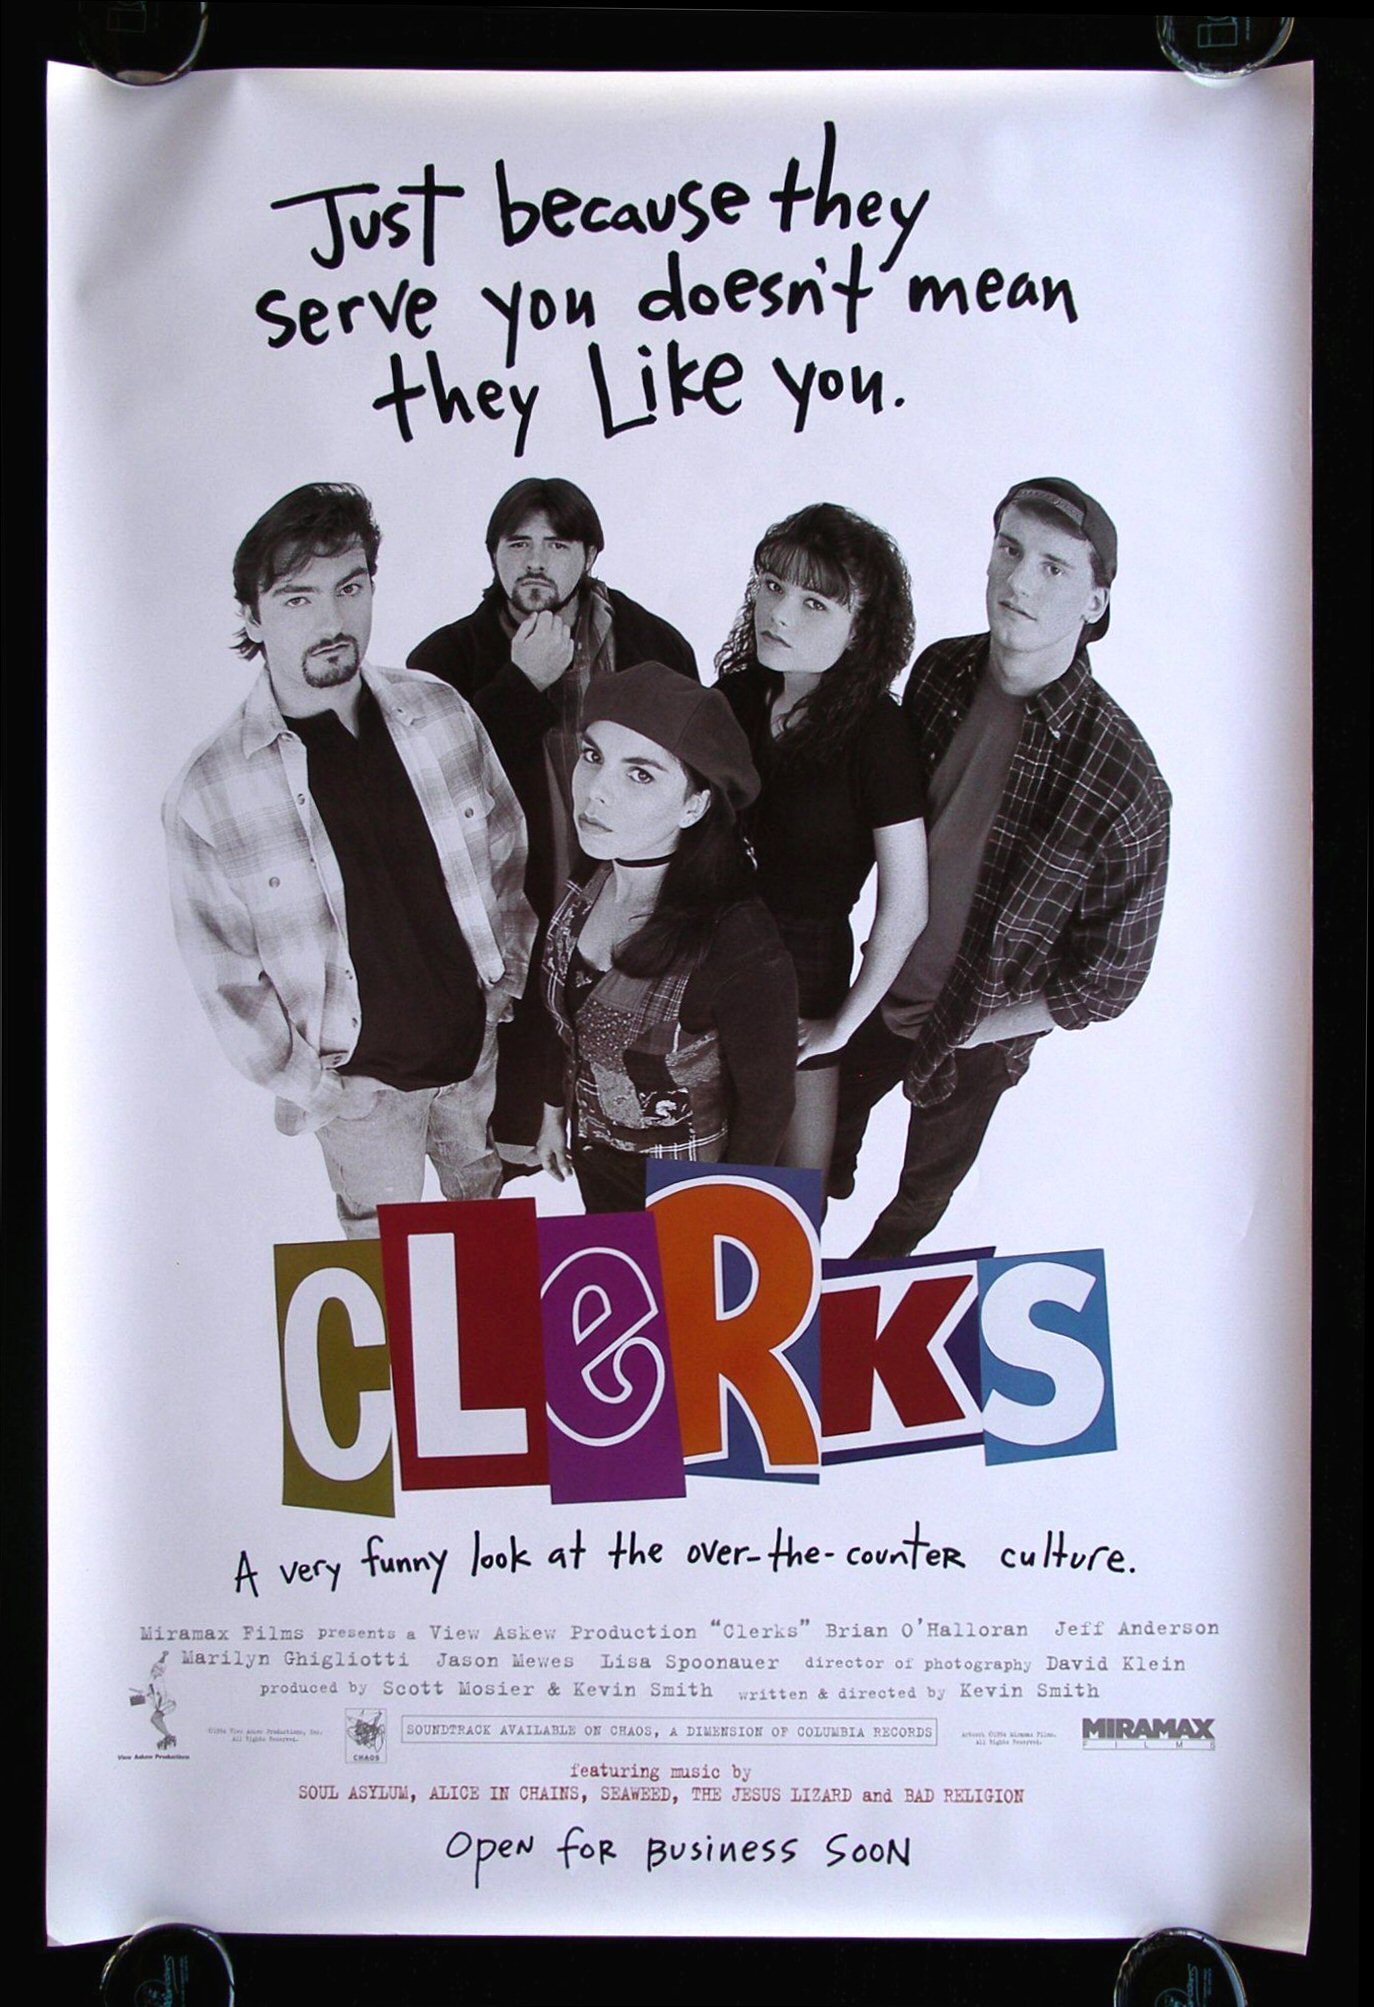 Download Clerks II 2006 YIFY Torrent for 720p mp4 movie